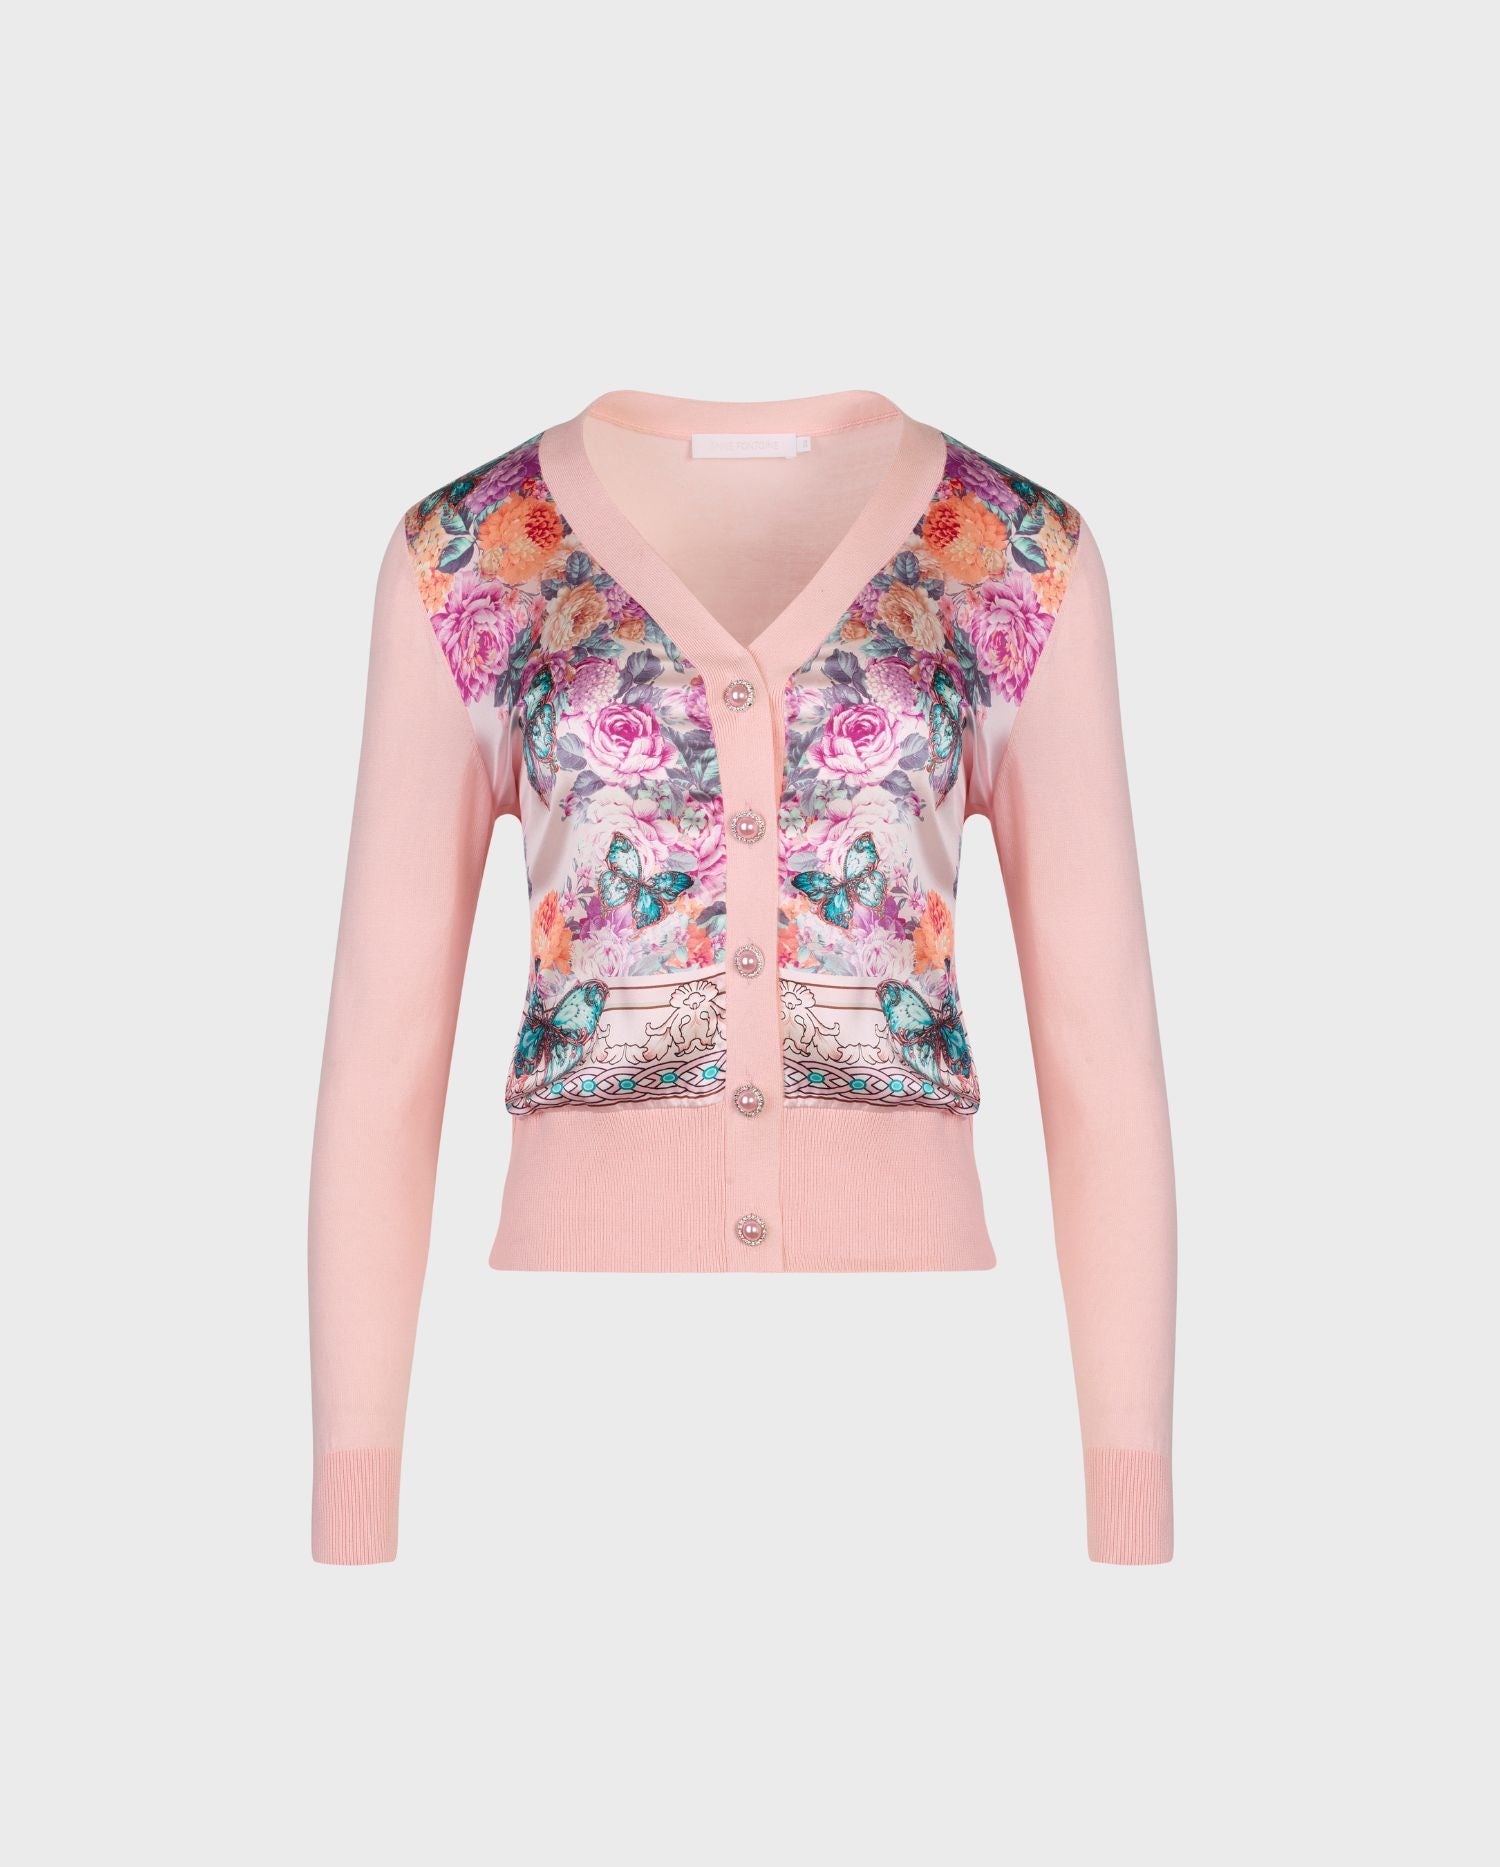 Discover the ZILIA long sleeve pink cardigan with floral print from ANNE FONTAINE